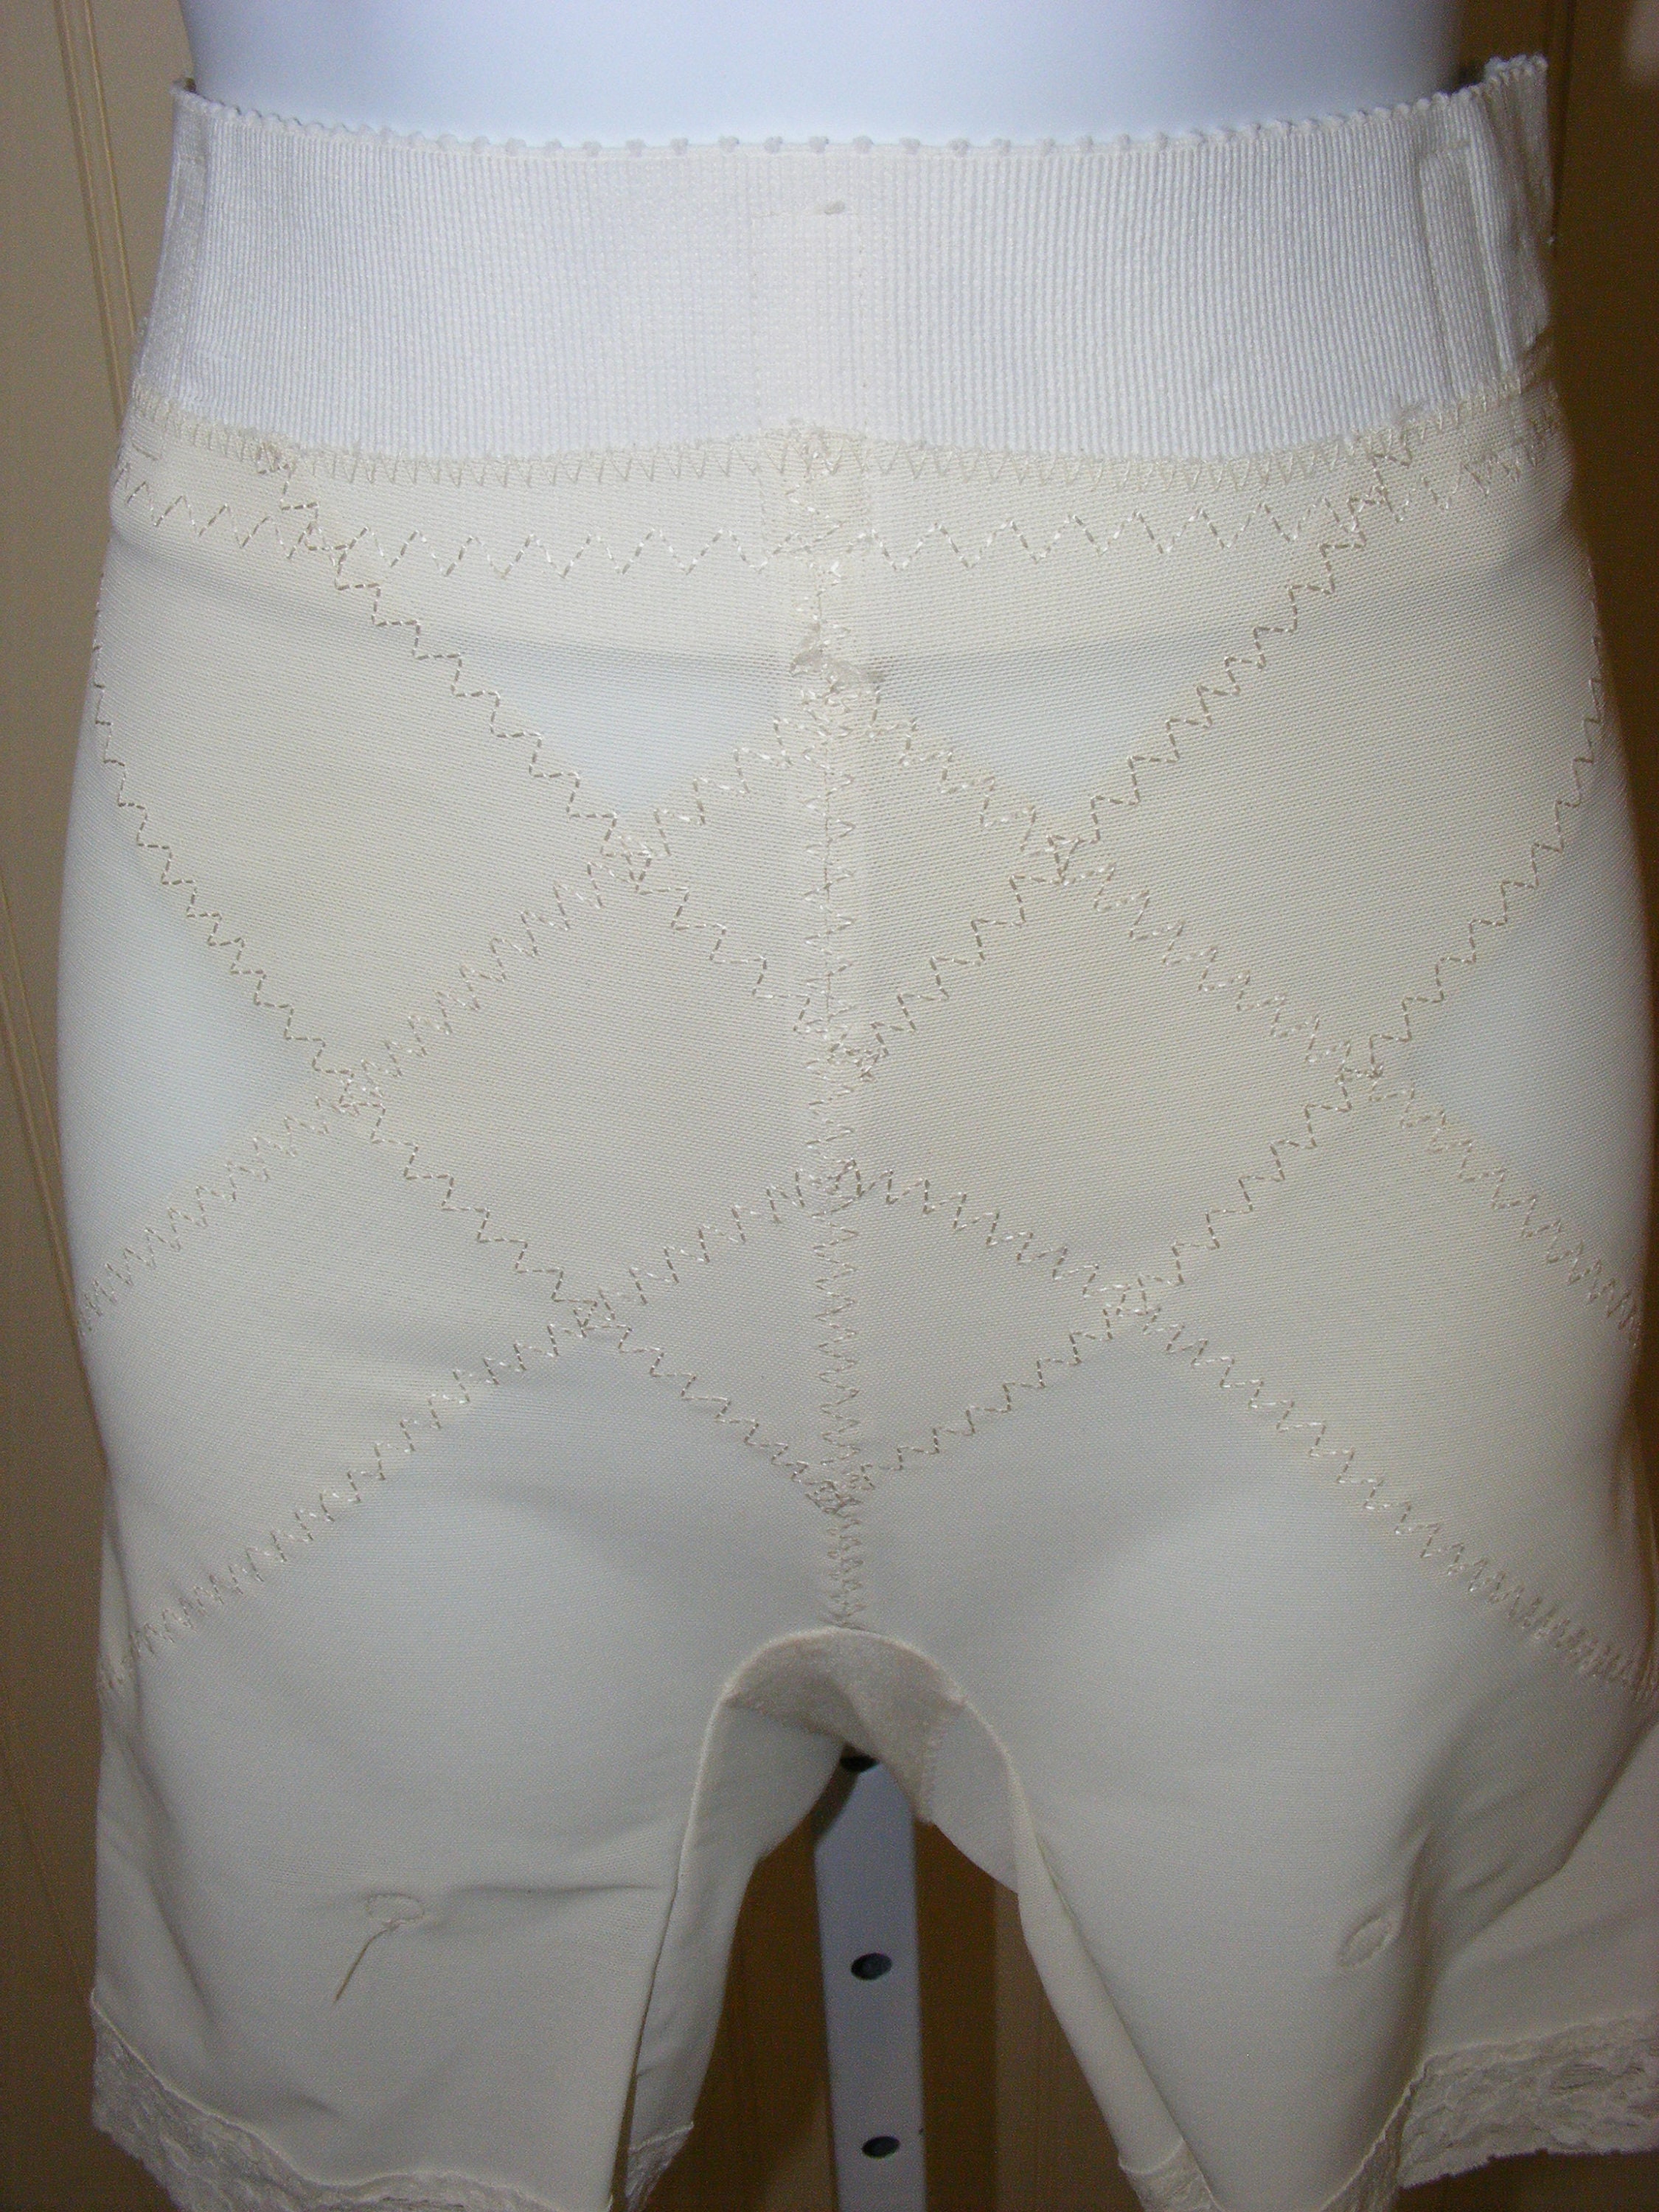 Vintage Retro 1960 1970s St Michael Firm Control Girdle in Original Box  Nylon & Spandex Waist 27 Inches Hips 38 Inches -  Canada